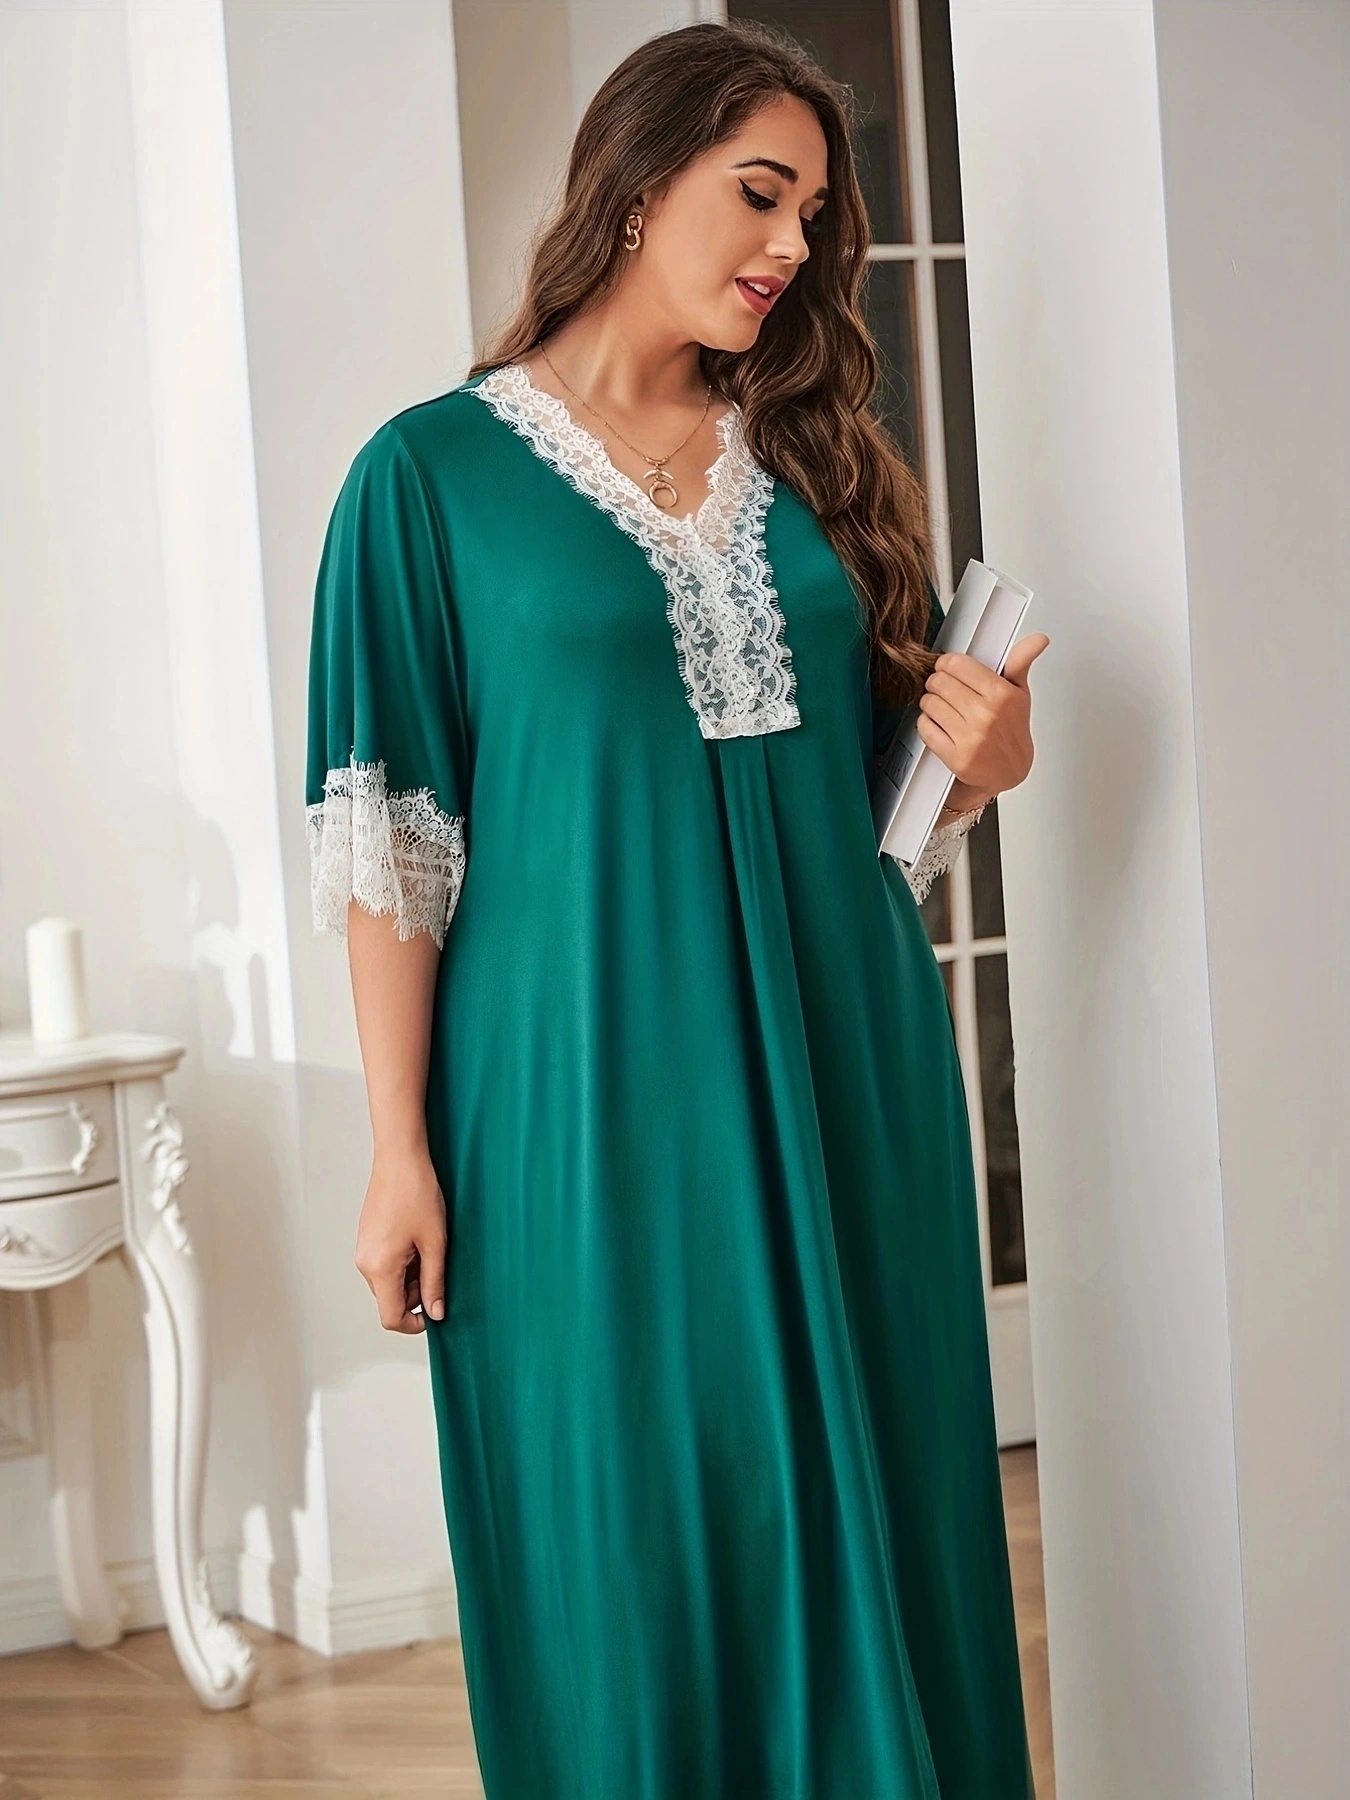 Plus Size Lace Nightgown Set Back Deep V Sleepwear For Women, Sleeveless  And Sexy Homewear T231030 From Catherine002, $2.44